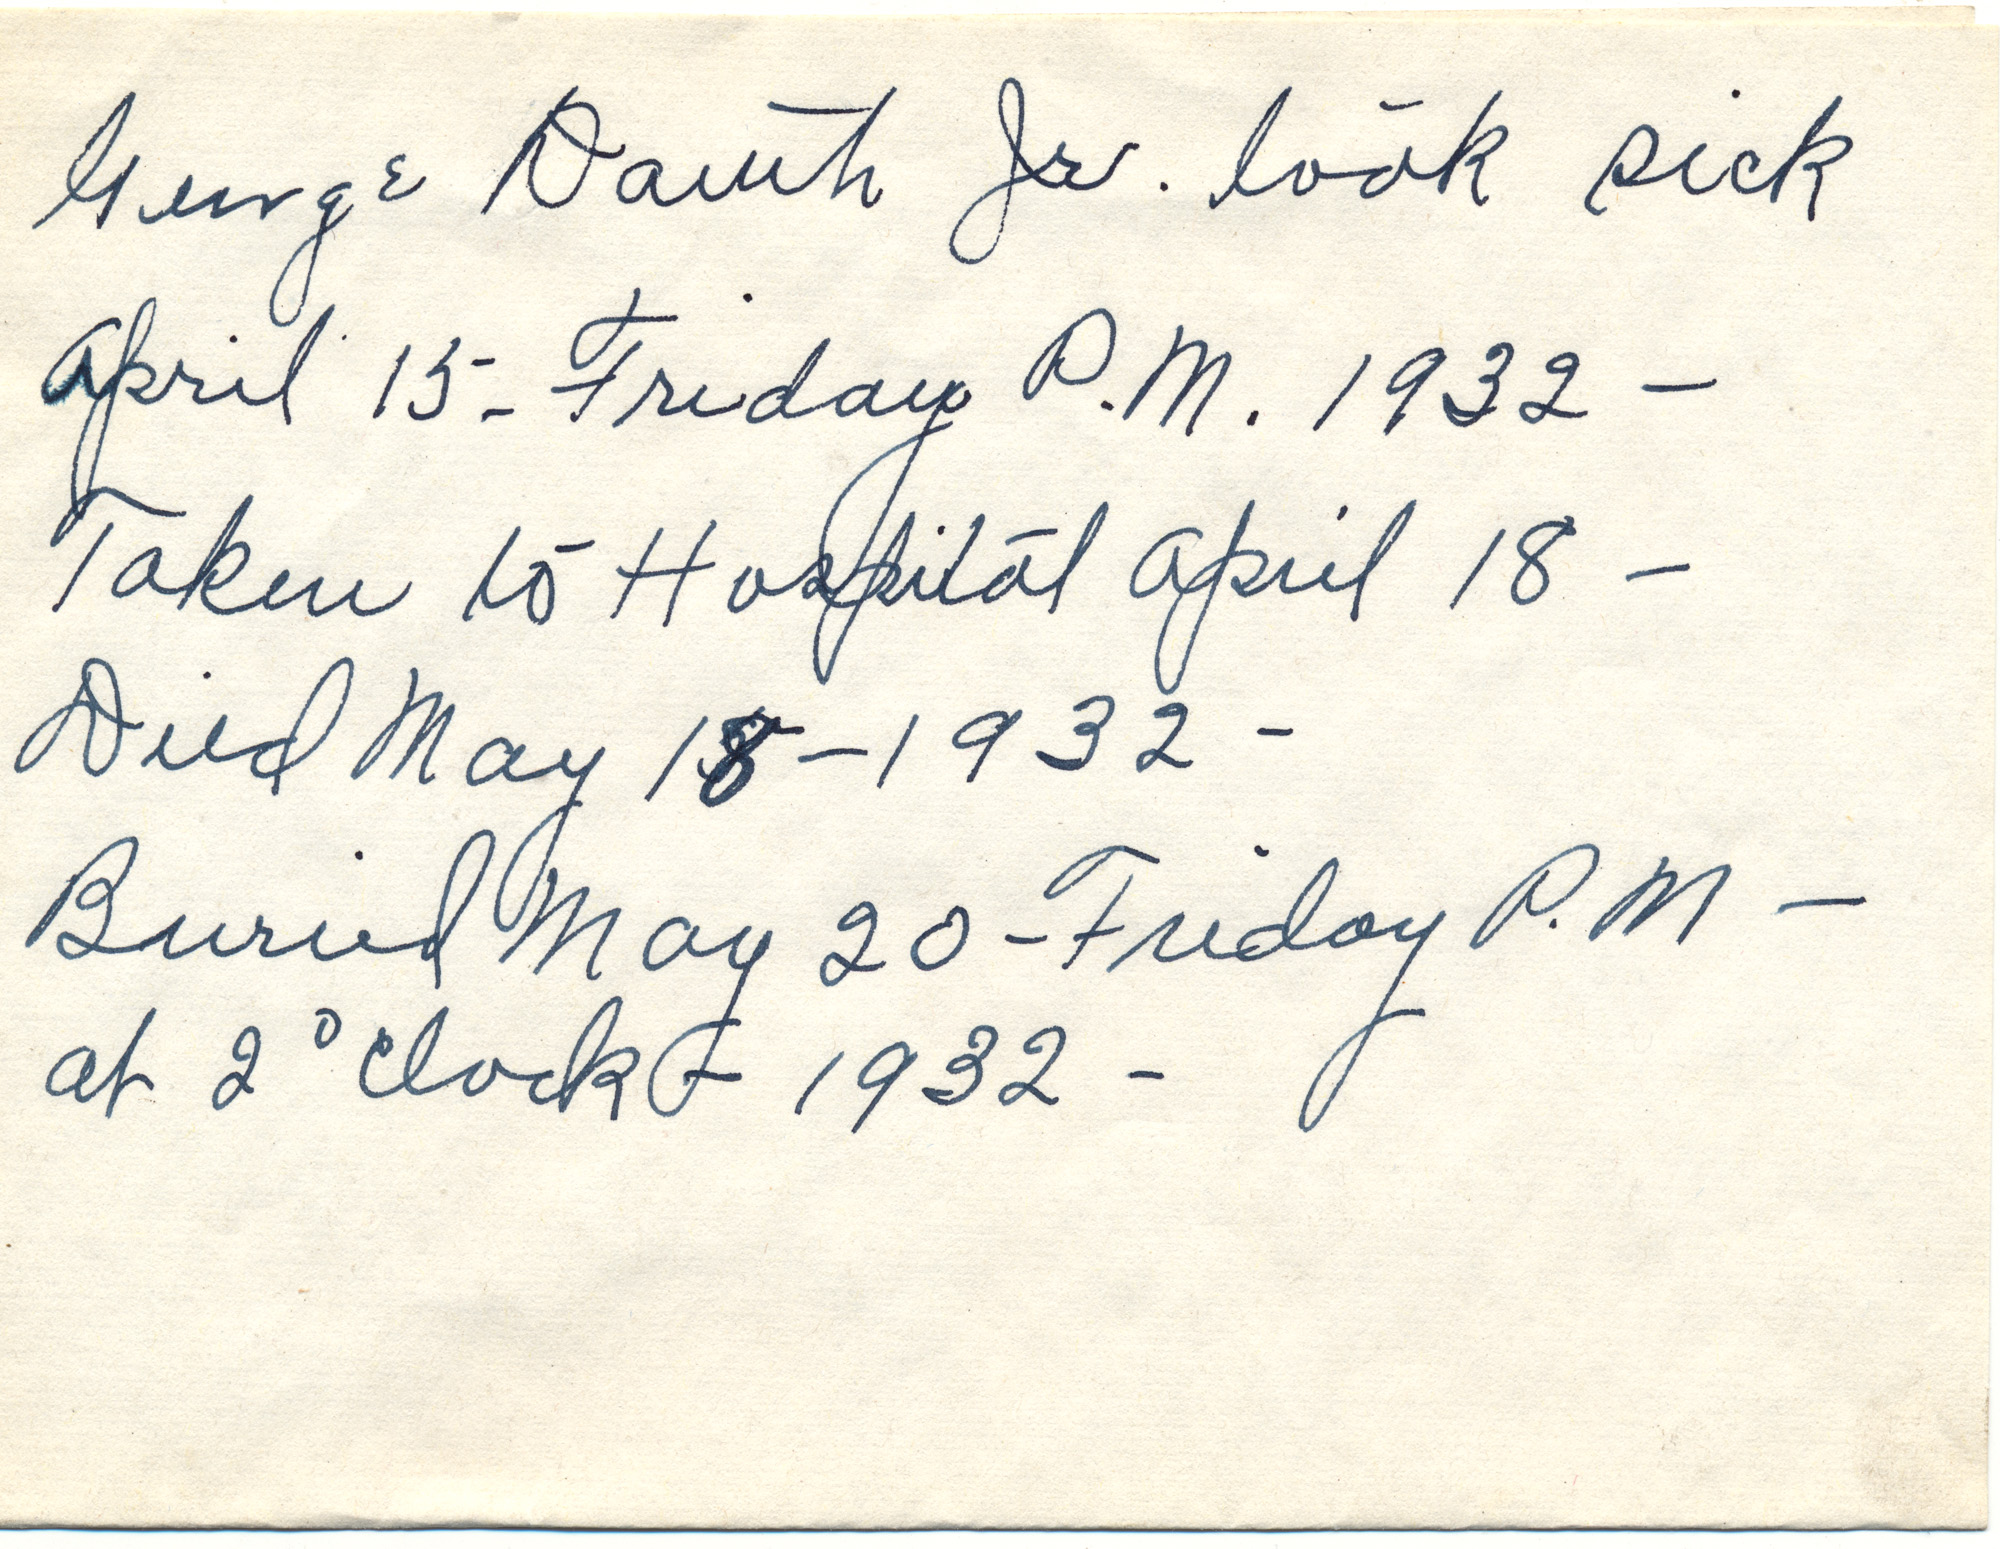 Dauth Family Archive - Circa 1932 - Notes About June Dauths Illness